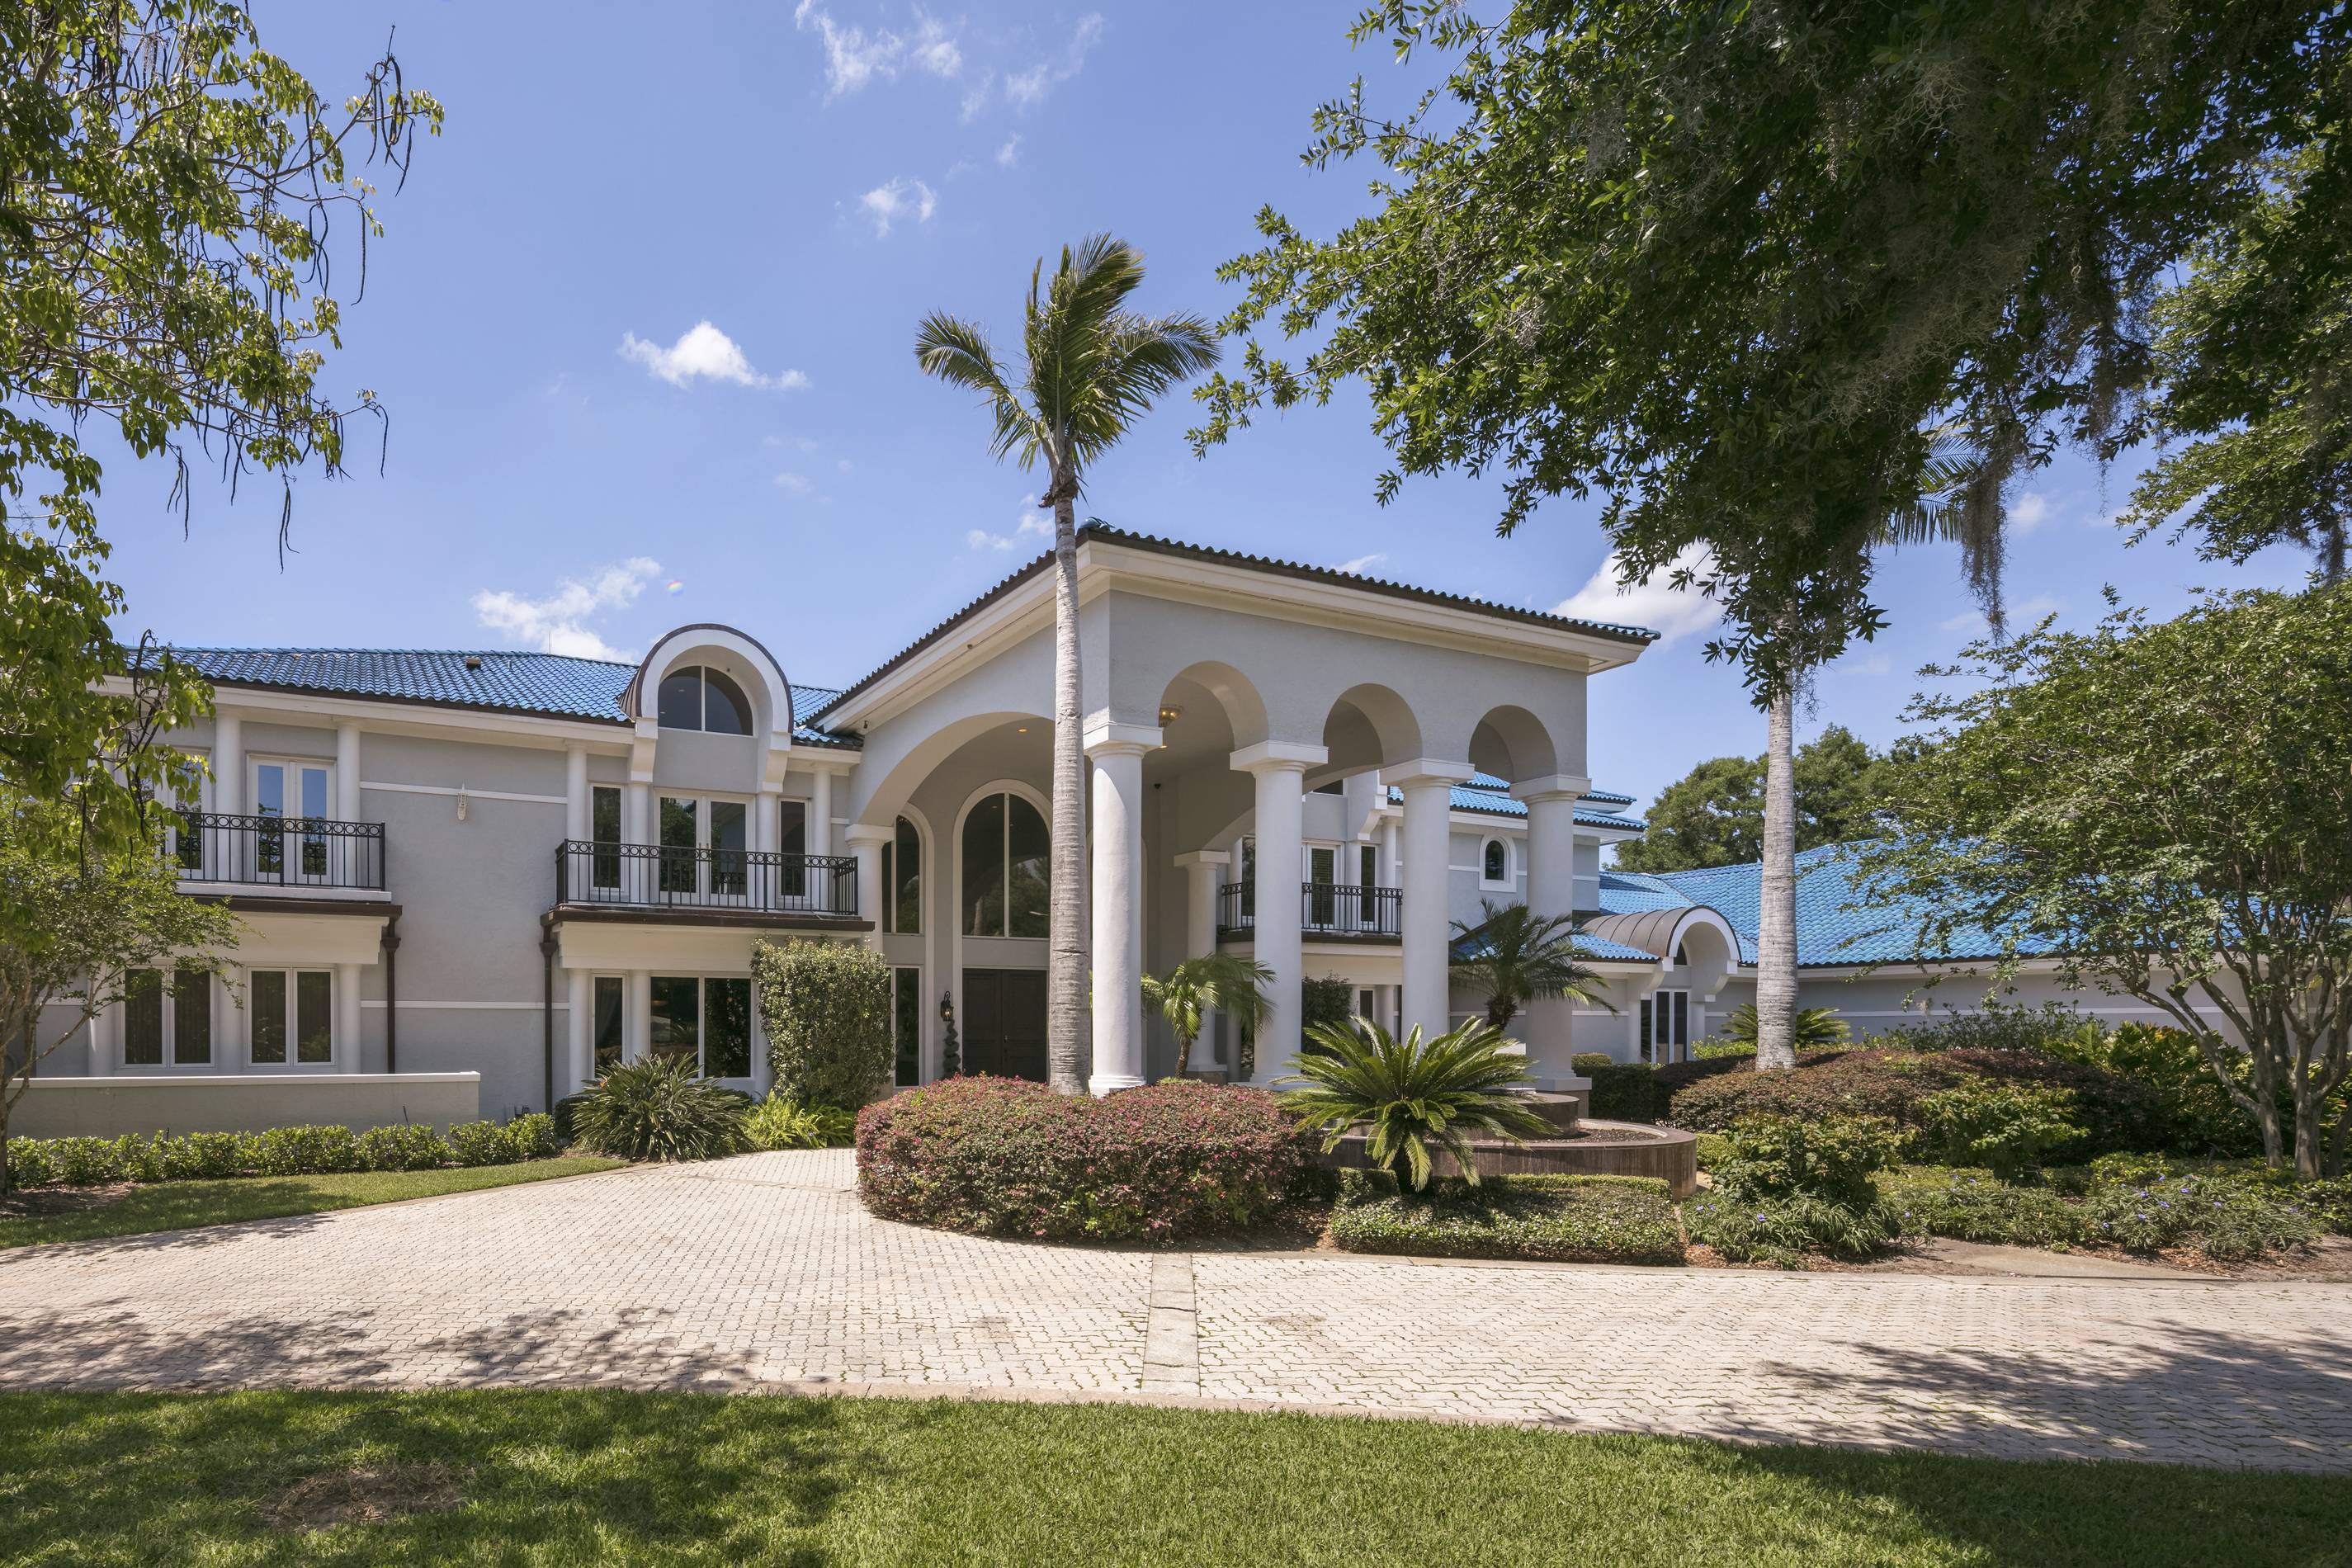 Shaq house in Florida, front entrance